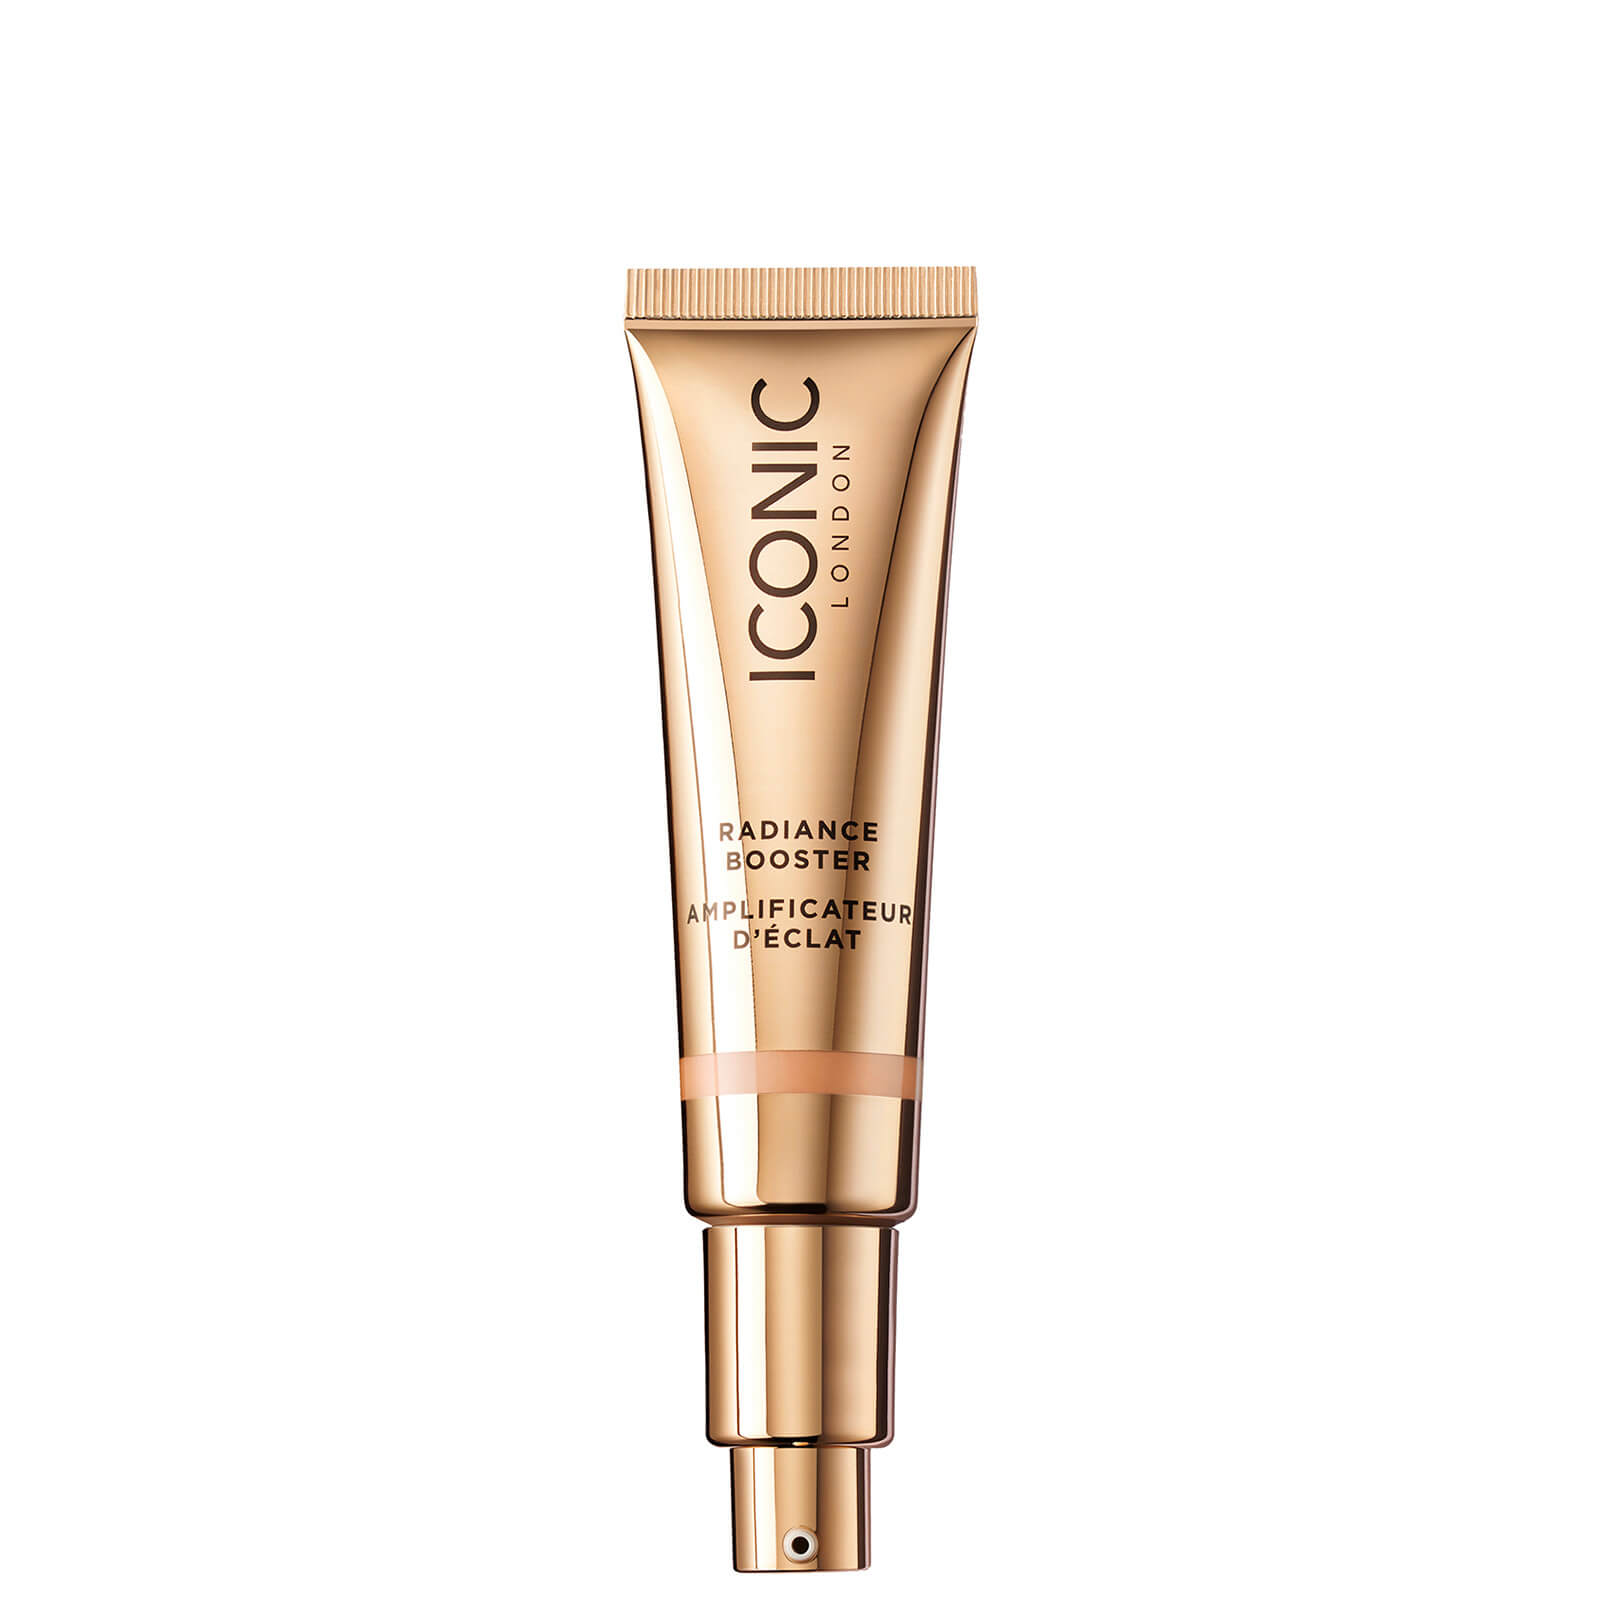 Image of Booster London Radiance ICONIC 30ml (varie tonalità) - Champagne Glow